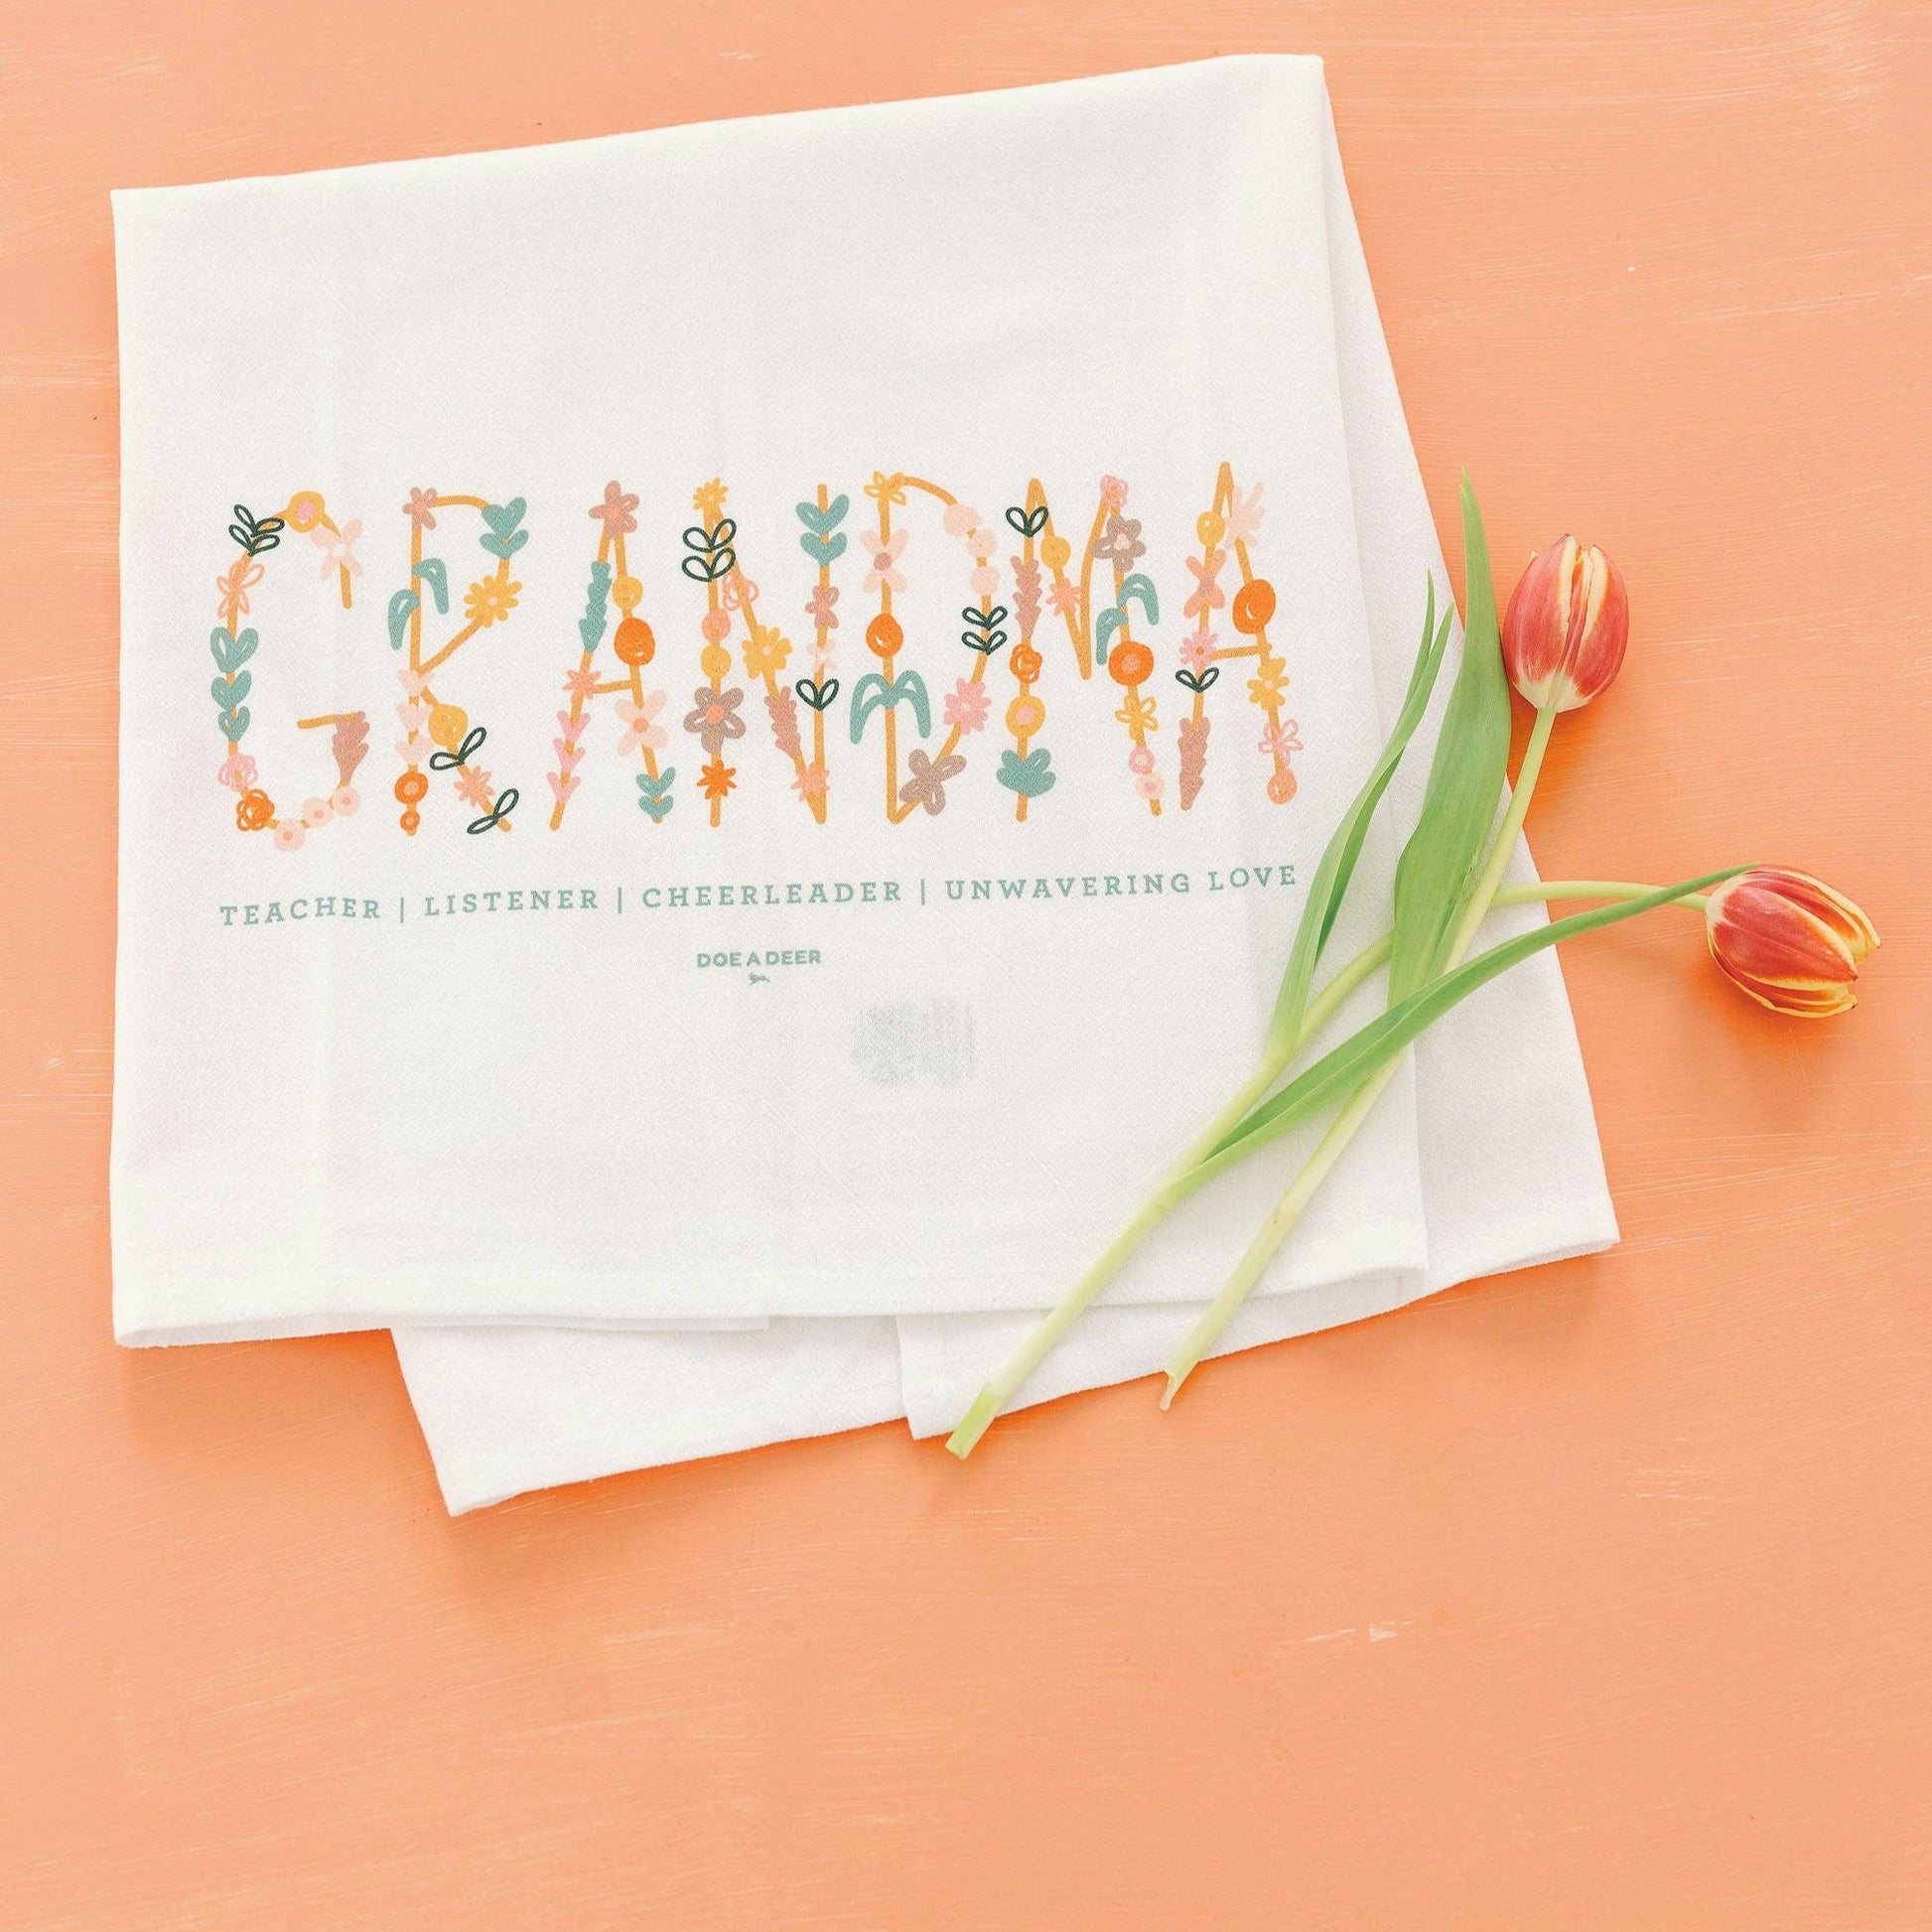 The Grandma print captures the bright feeling of spring. 